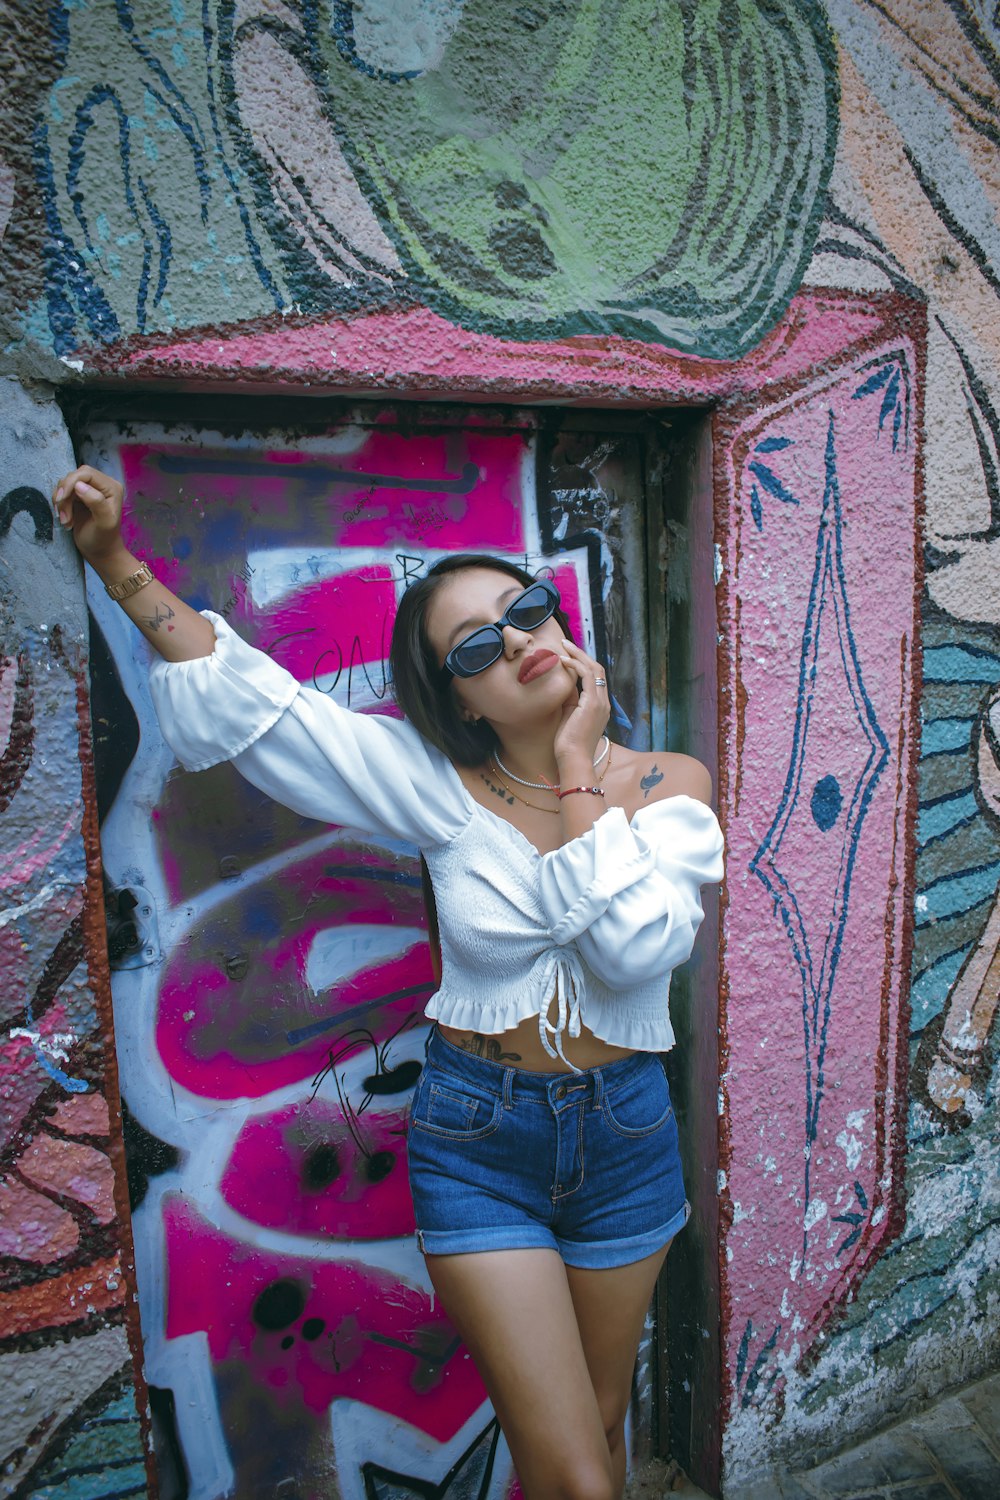 a woman standing in front of a wall covered in graffiti